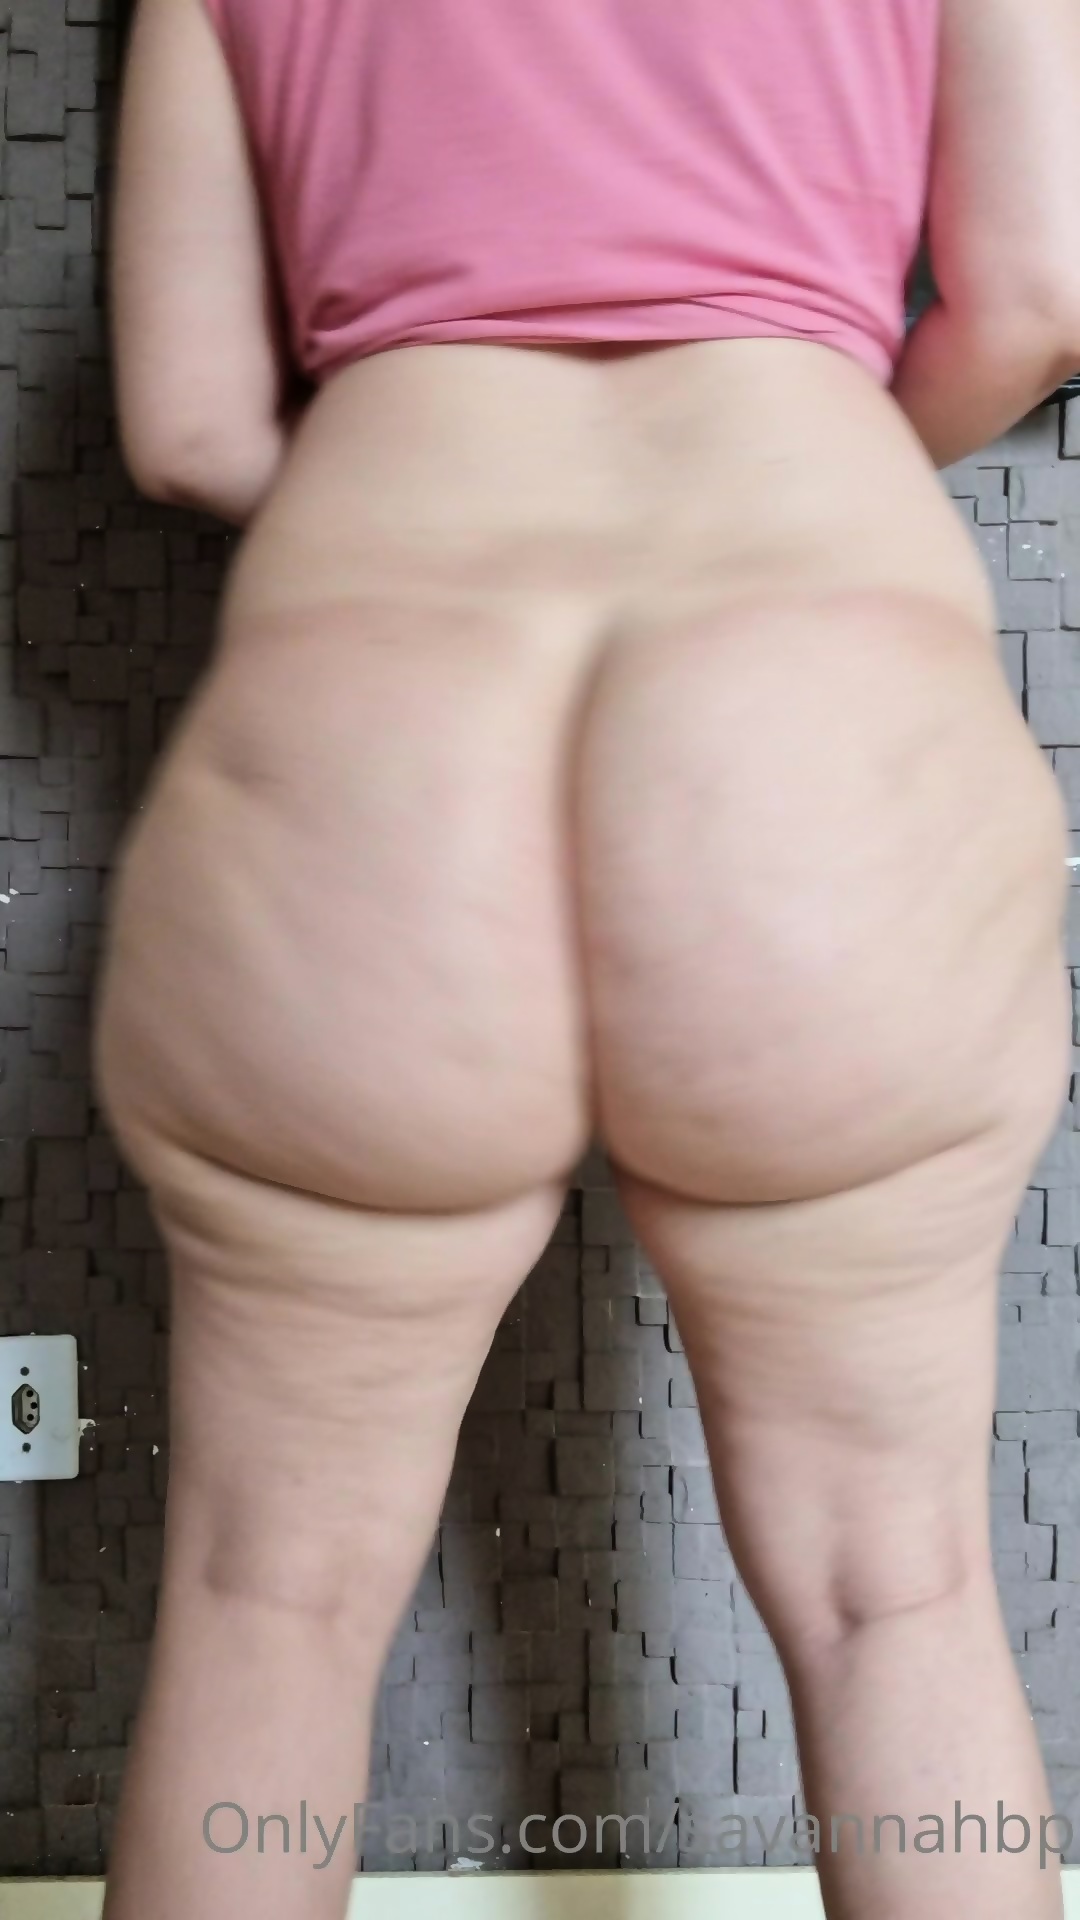 PAWG Jiggly Cellulite Saggy Tits pic